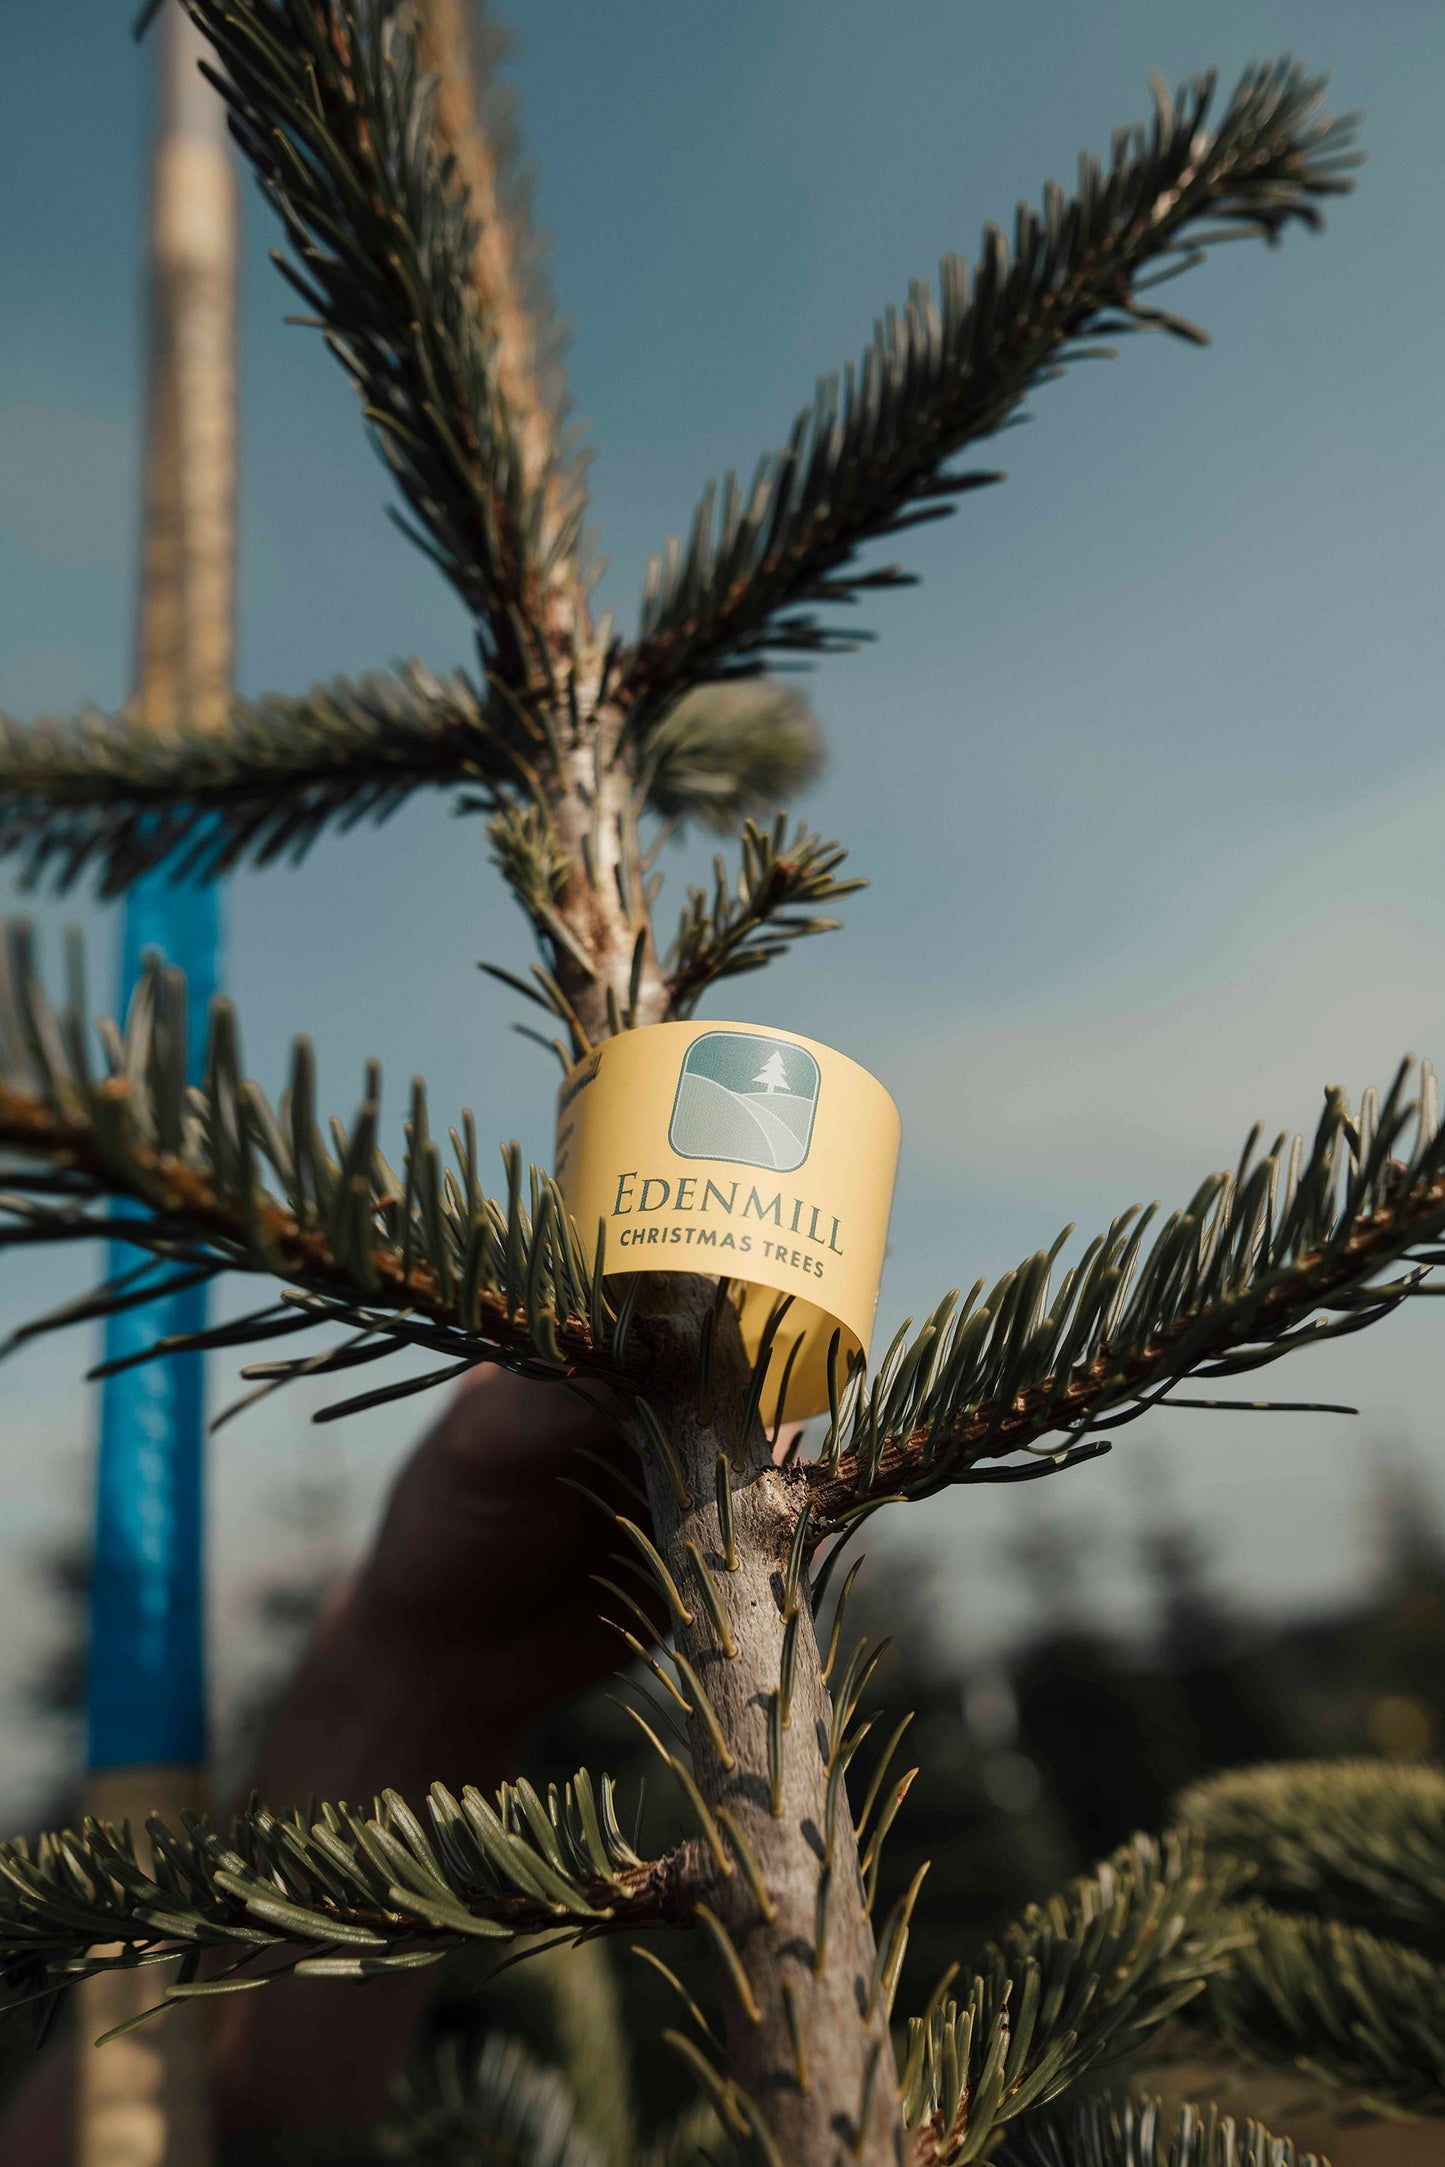 Edenmill label on a fresh real Christmas Tree